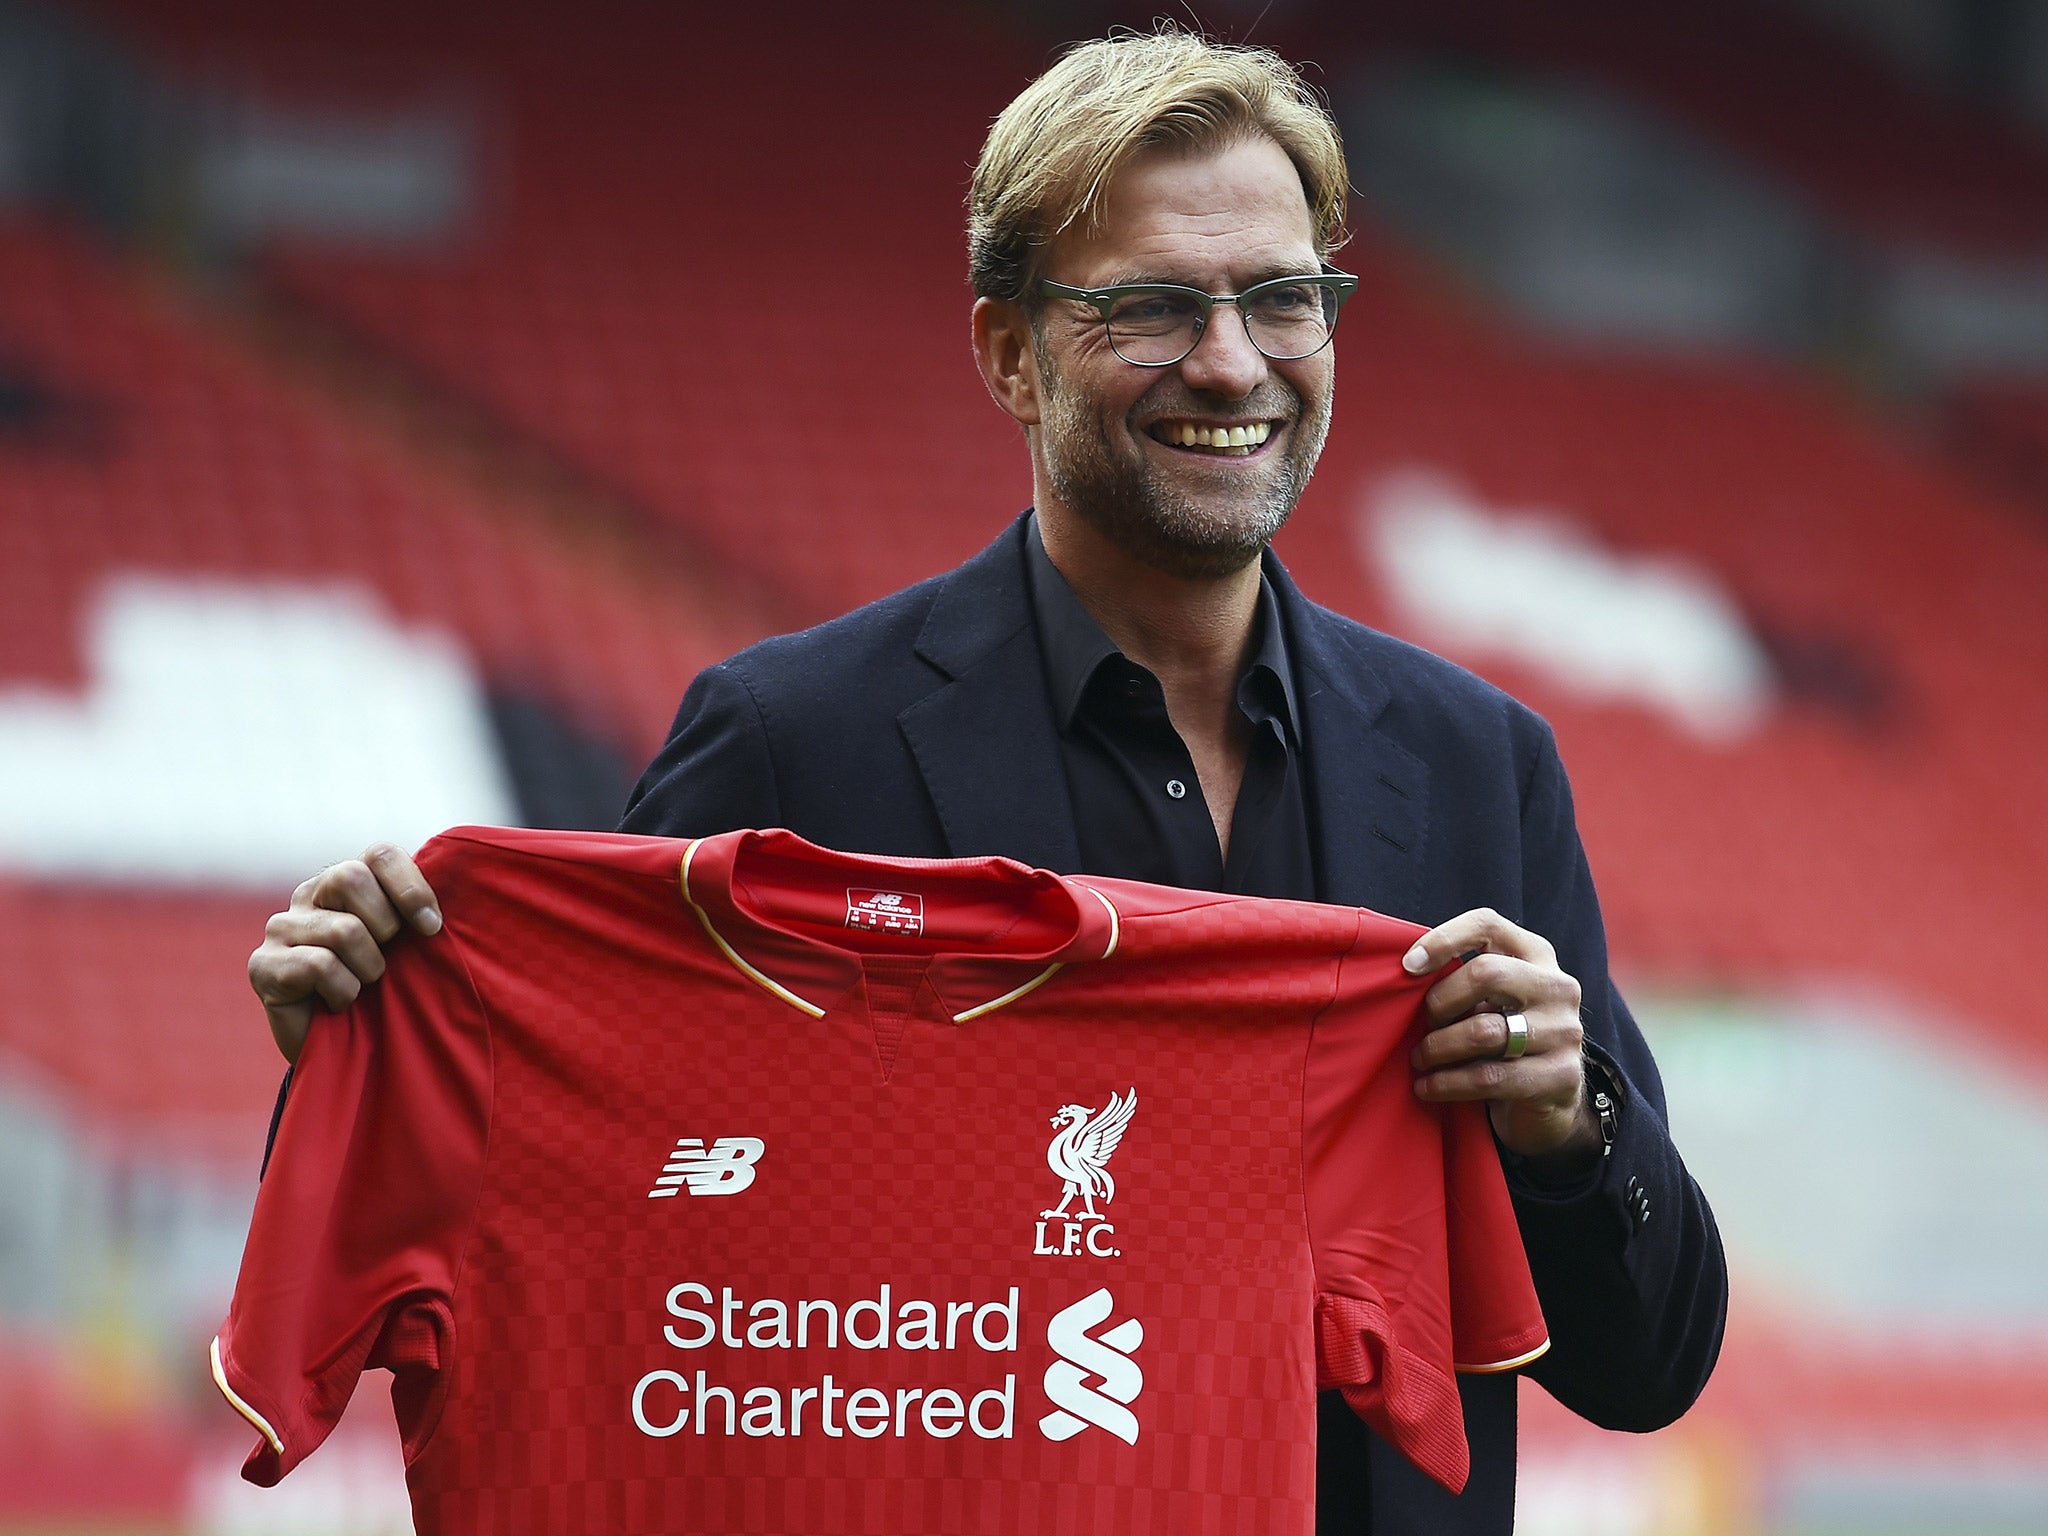 Klopp was attracted by the romance of Liverpool's history